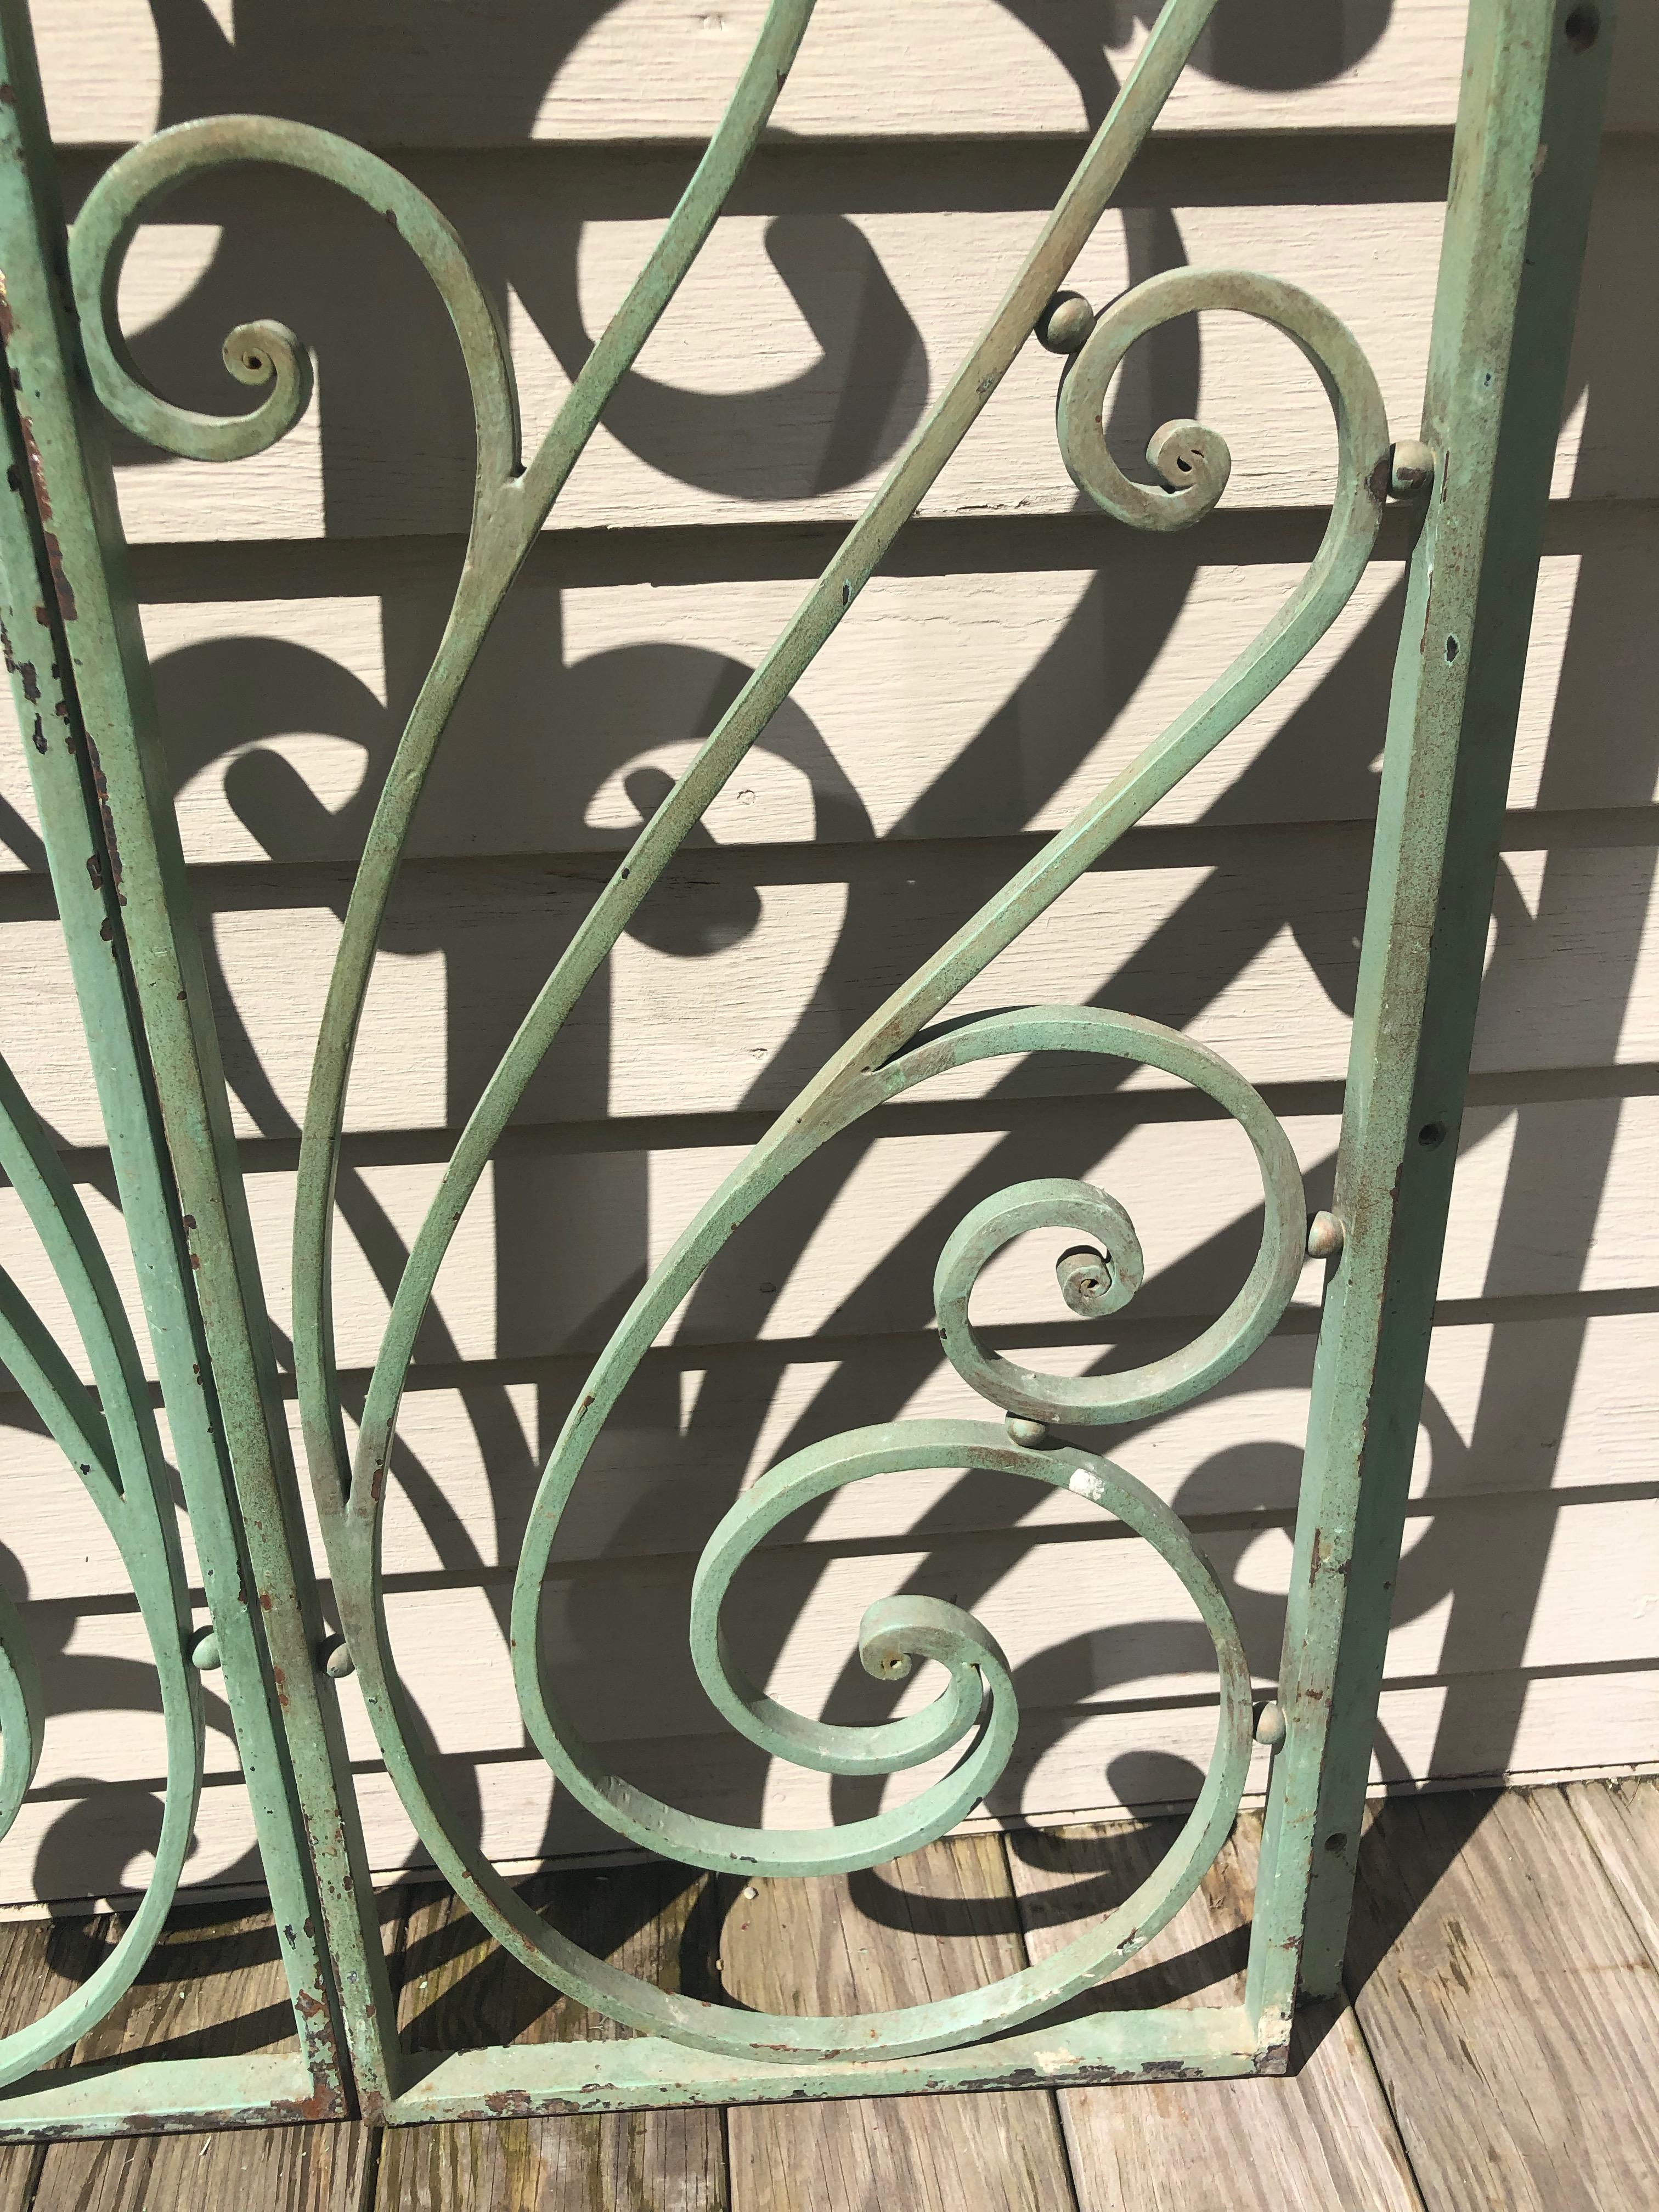 Pair of French Wrought Iron Beaux Arts-Style Gates with Mounting Hardware #1 2